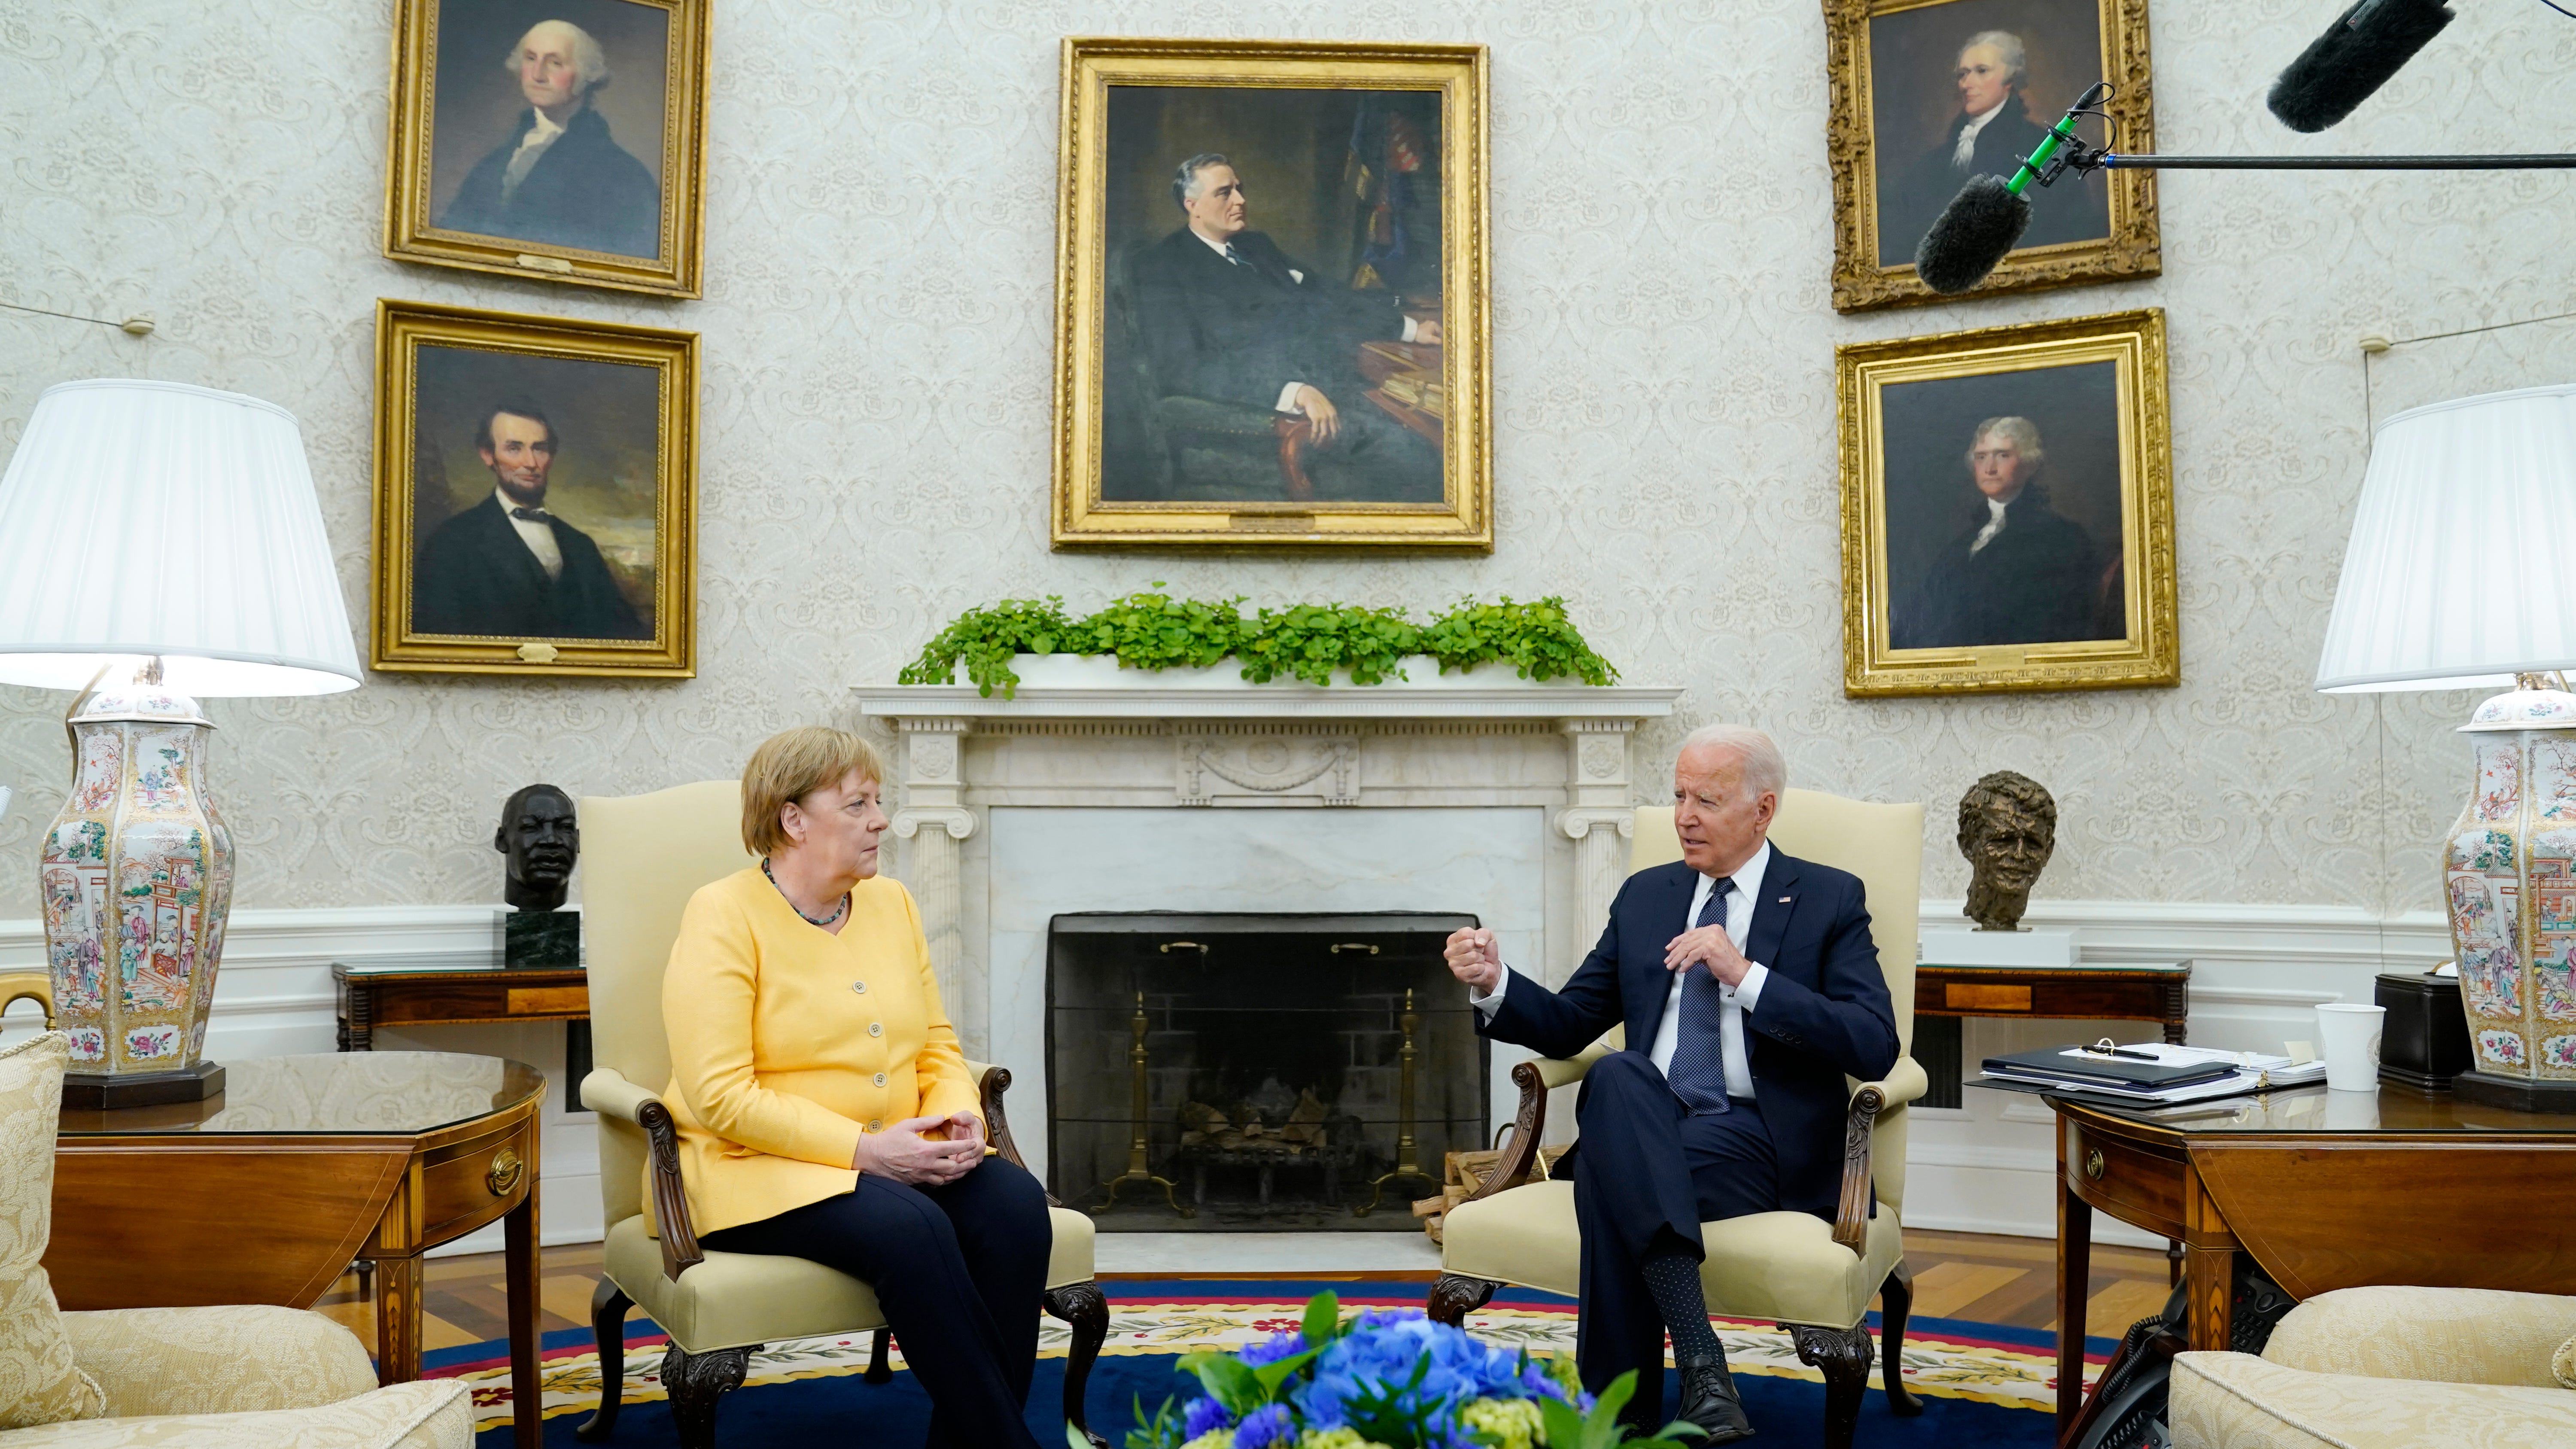 German Chancellor pressed President Joe Biden on the United States' travel ban during a July meeting.